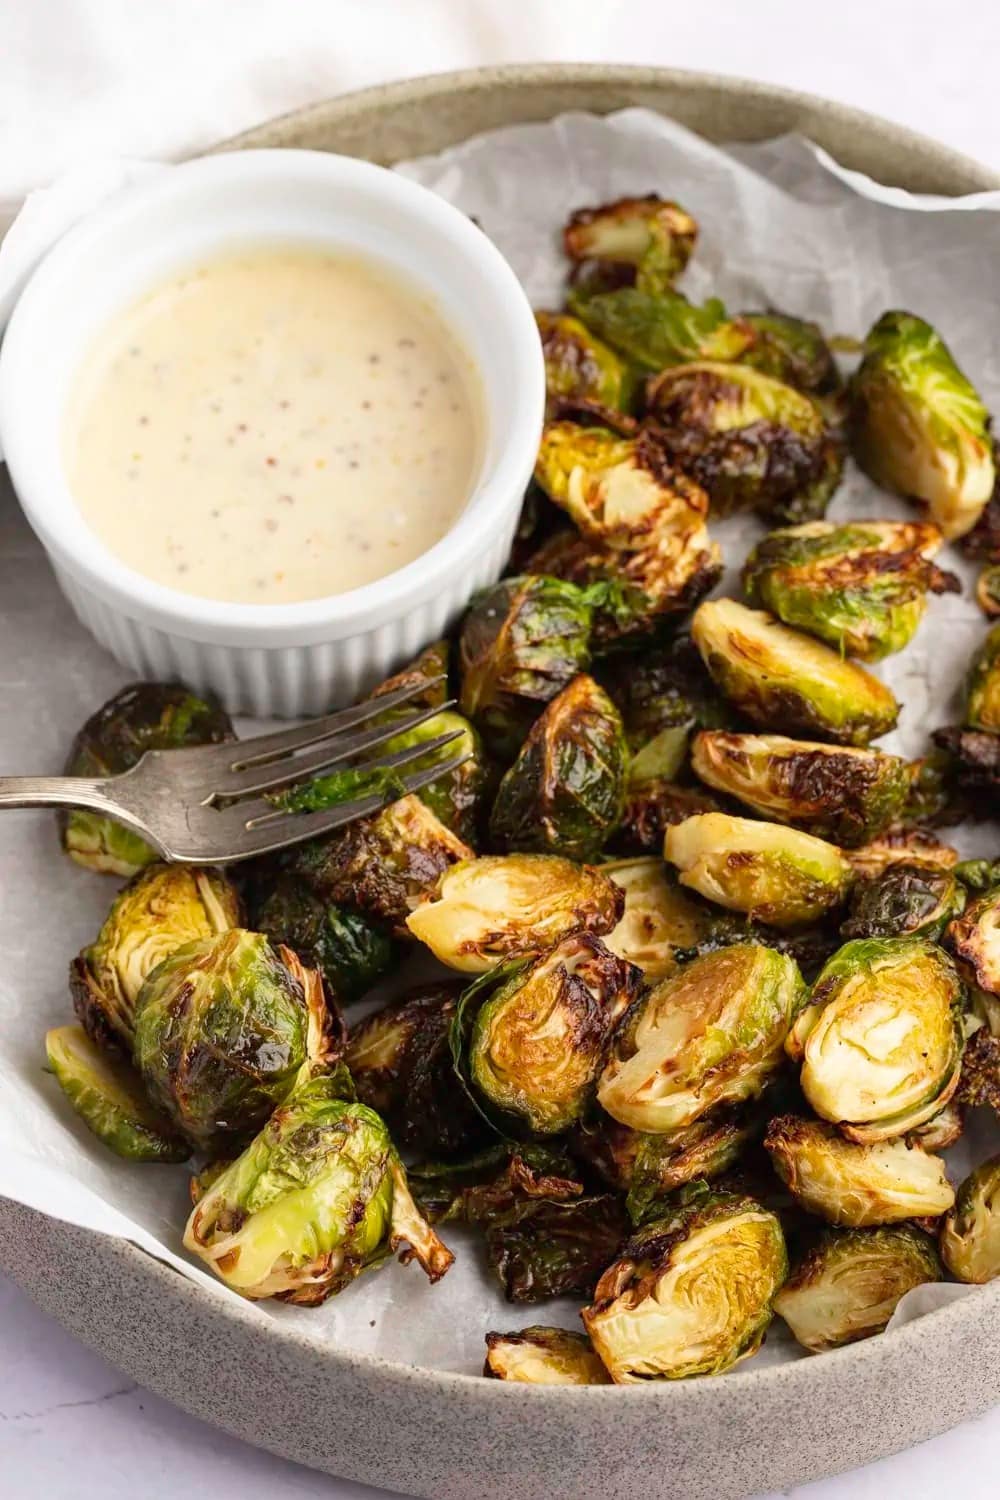 Plater of Roasted Brussels Sprouts with bowl of dipping sauce